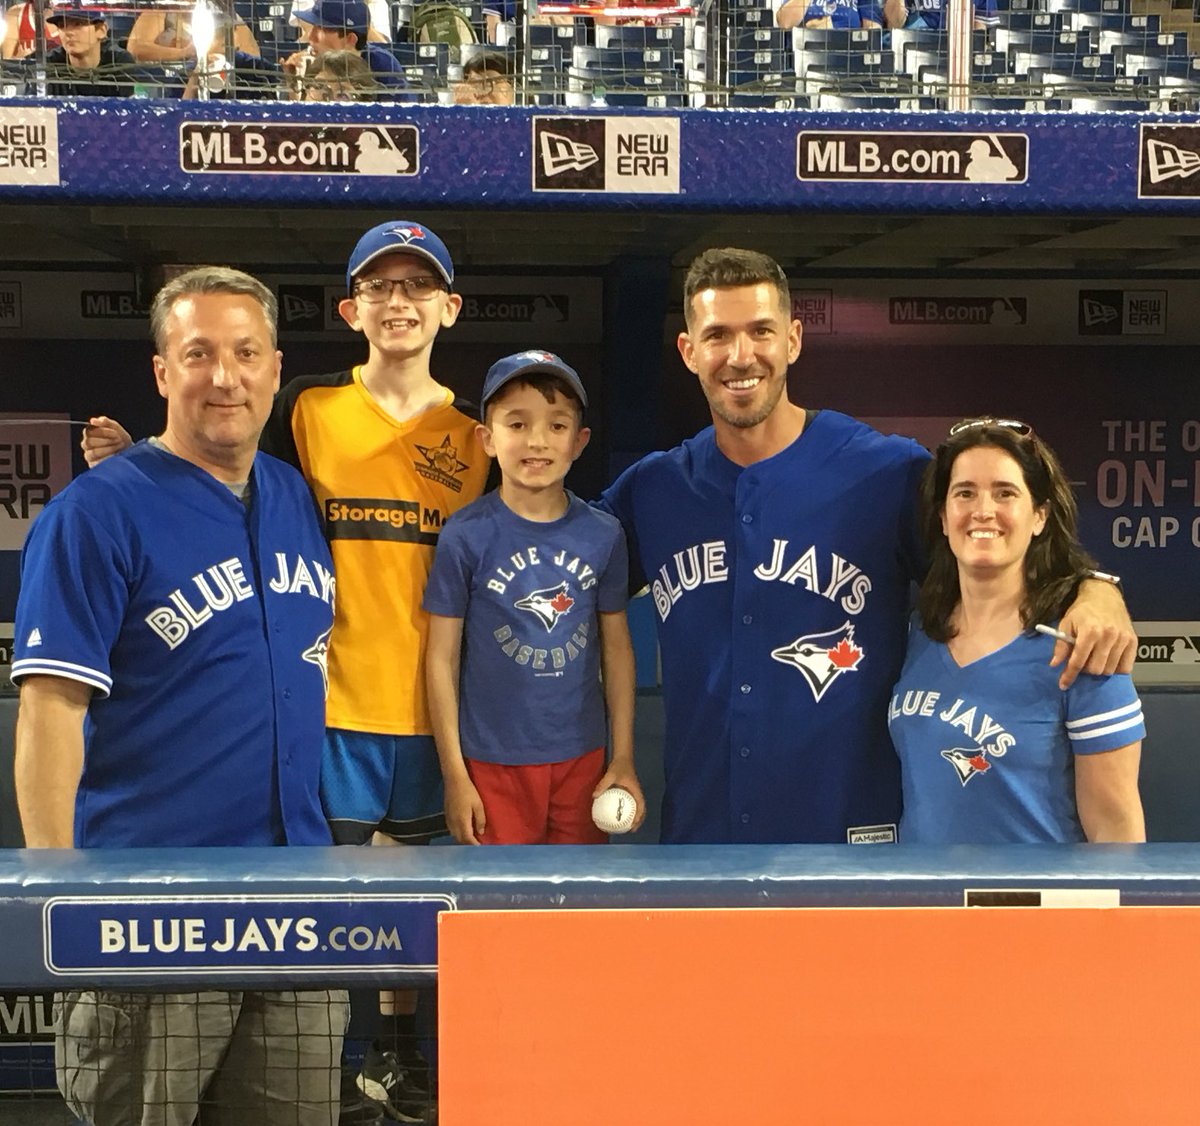 @jparencibia9 It was great meeting you! Thanks for being so sweet and taking a minute to chat with my youngest son after he asked if his smile was ok. ;) @Rogers #RogersMoments